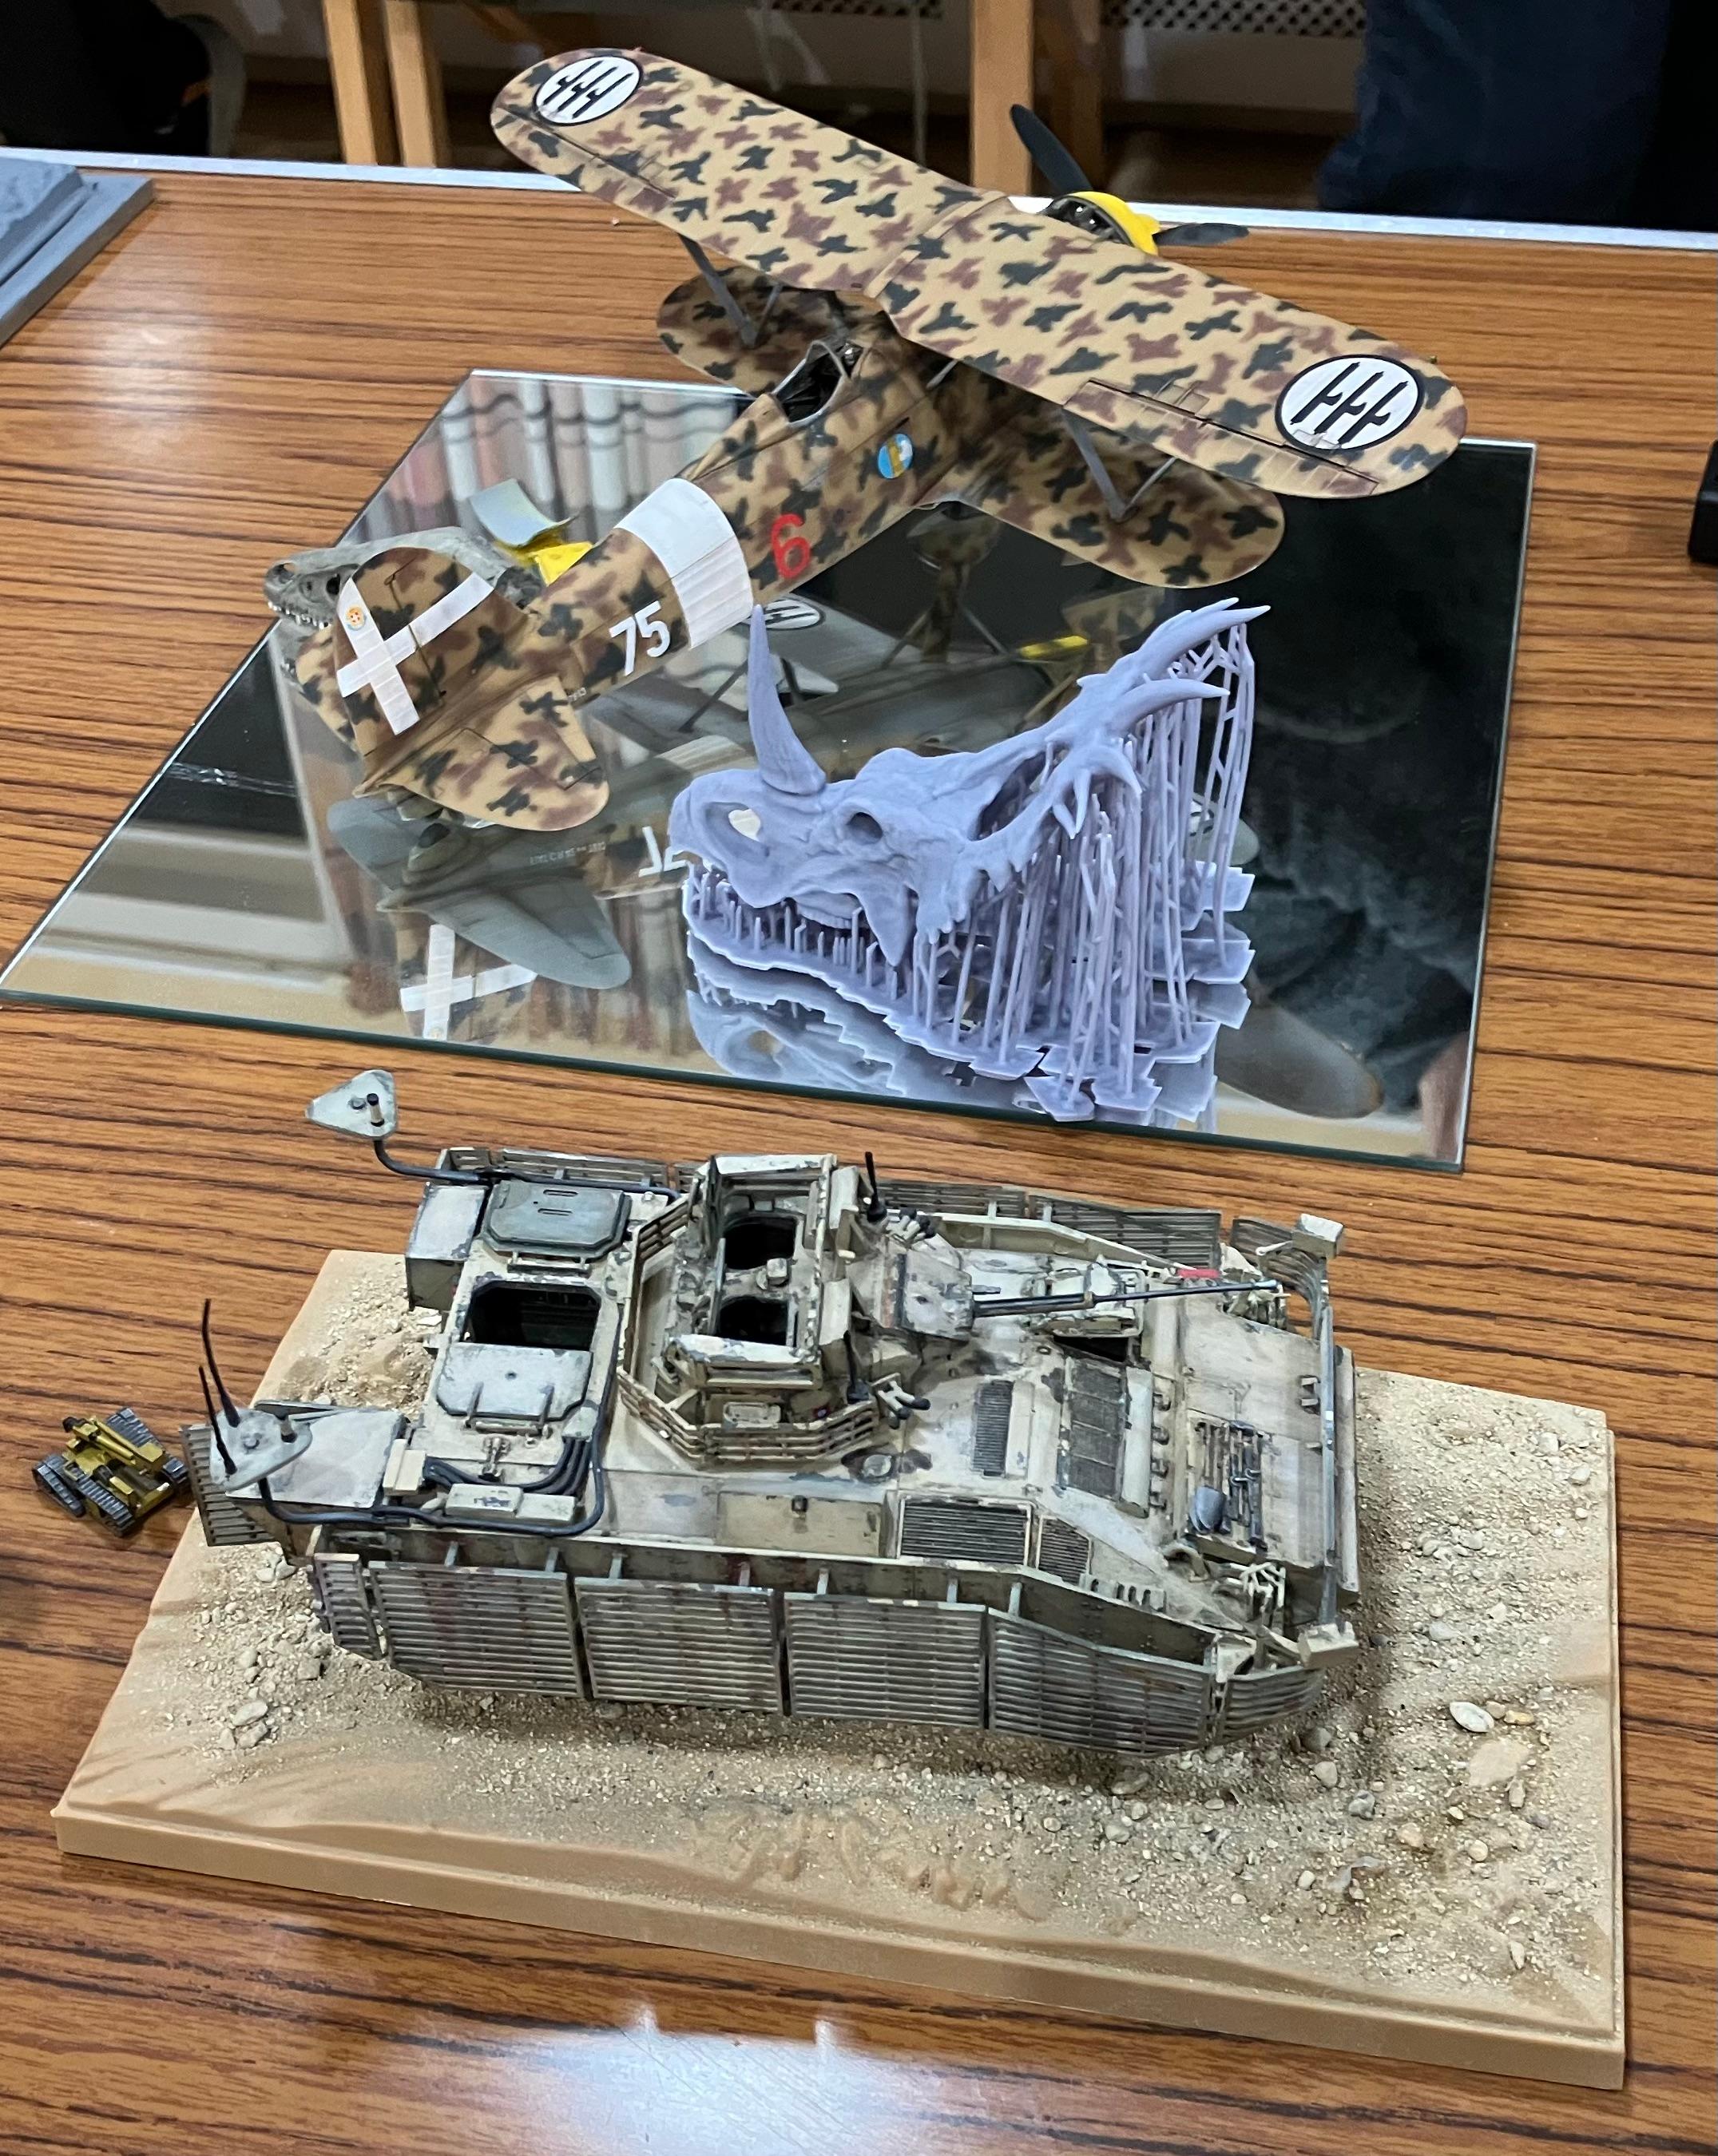 Warrior APC by Eric (with Alasdair's Falco in background)